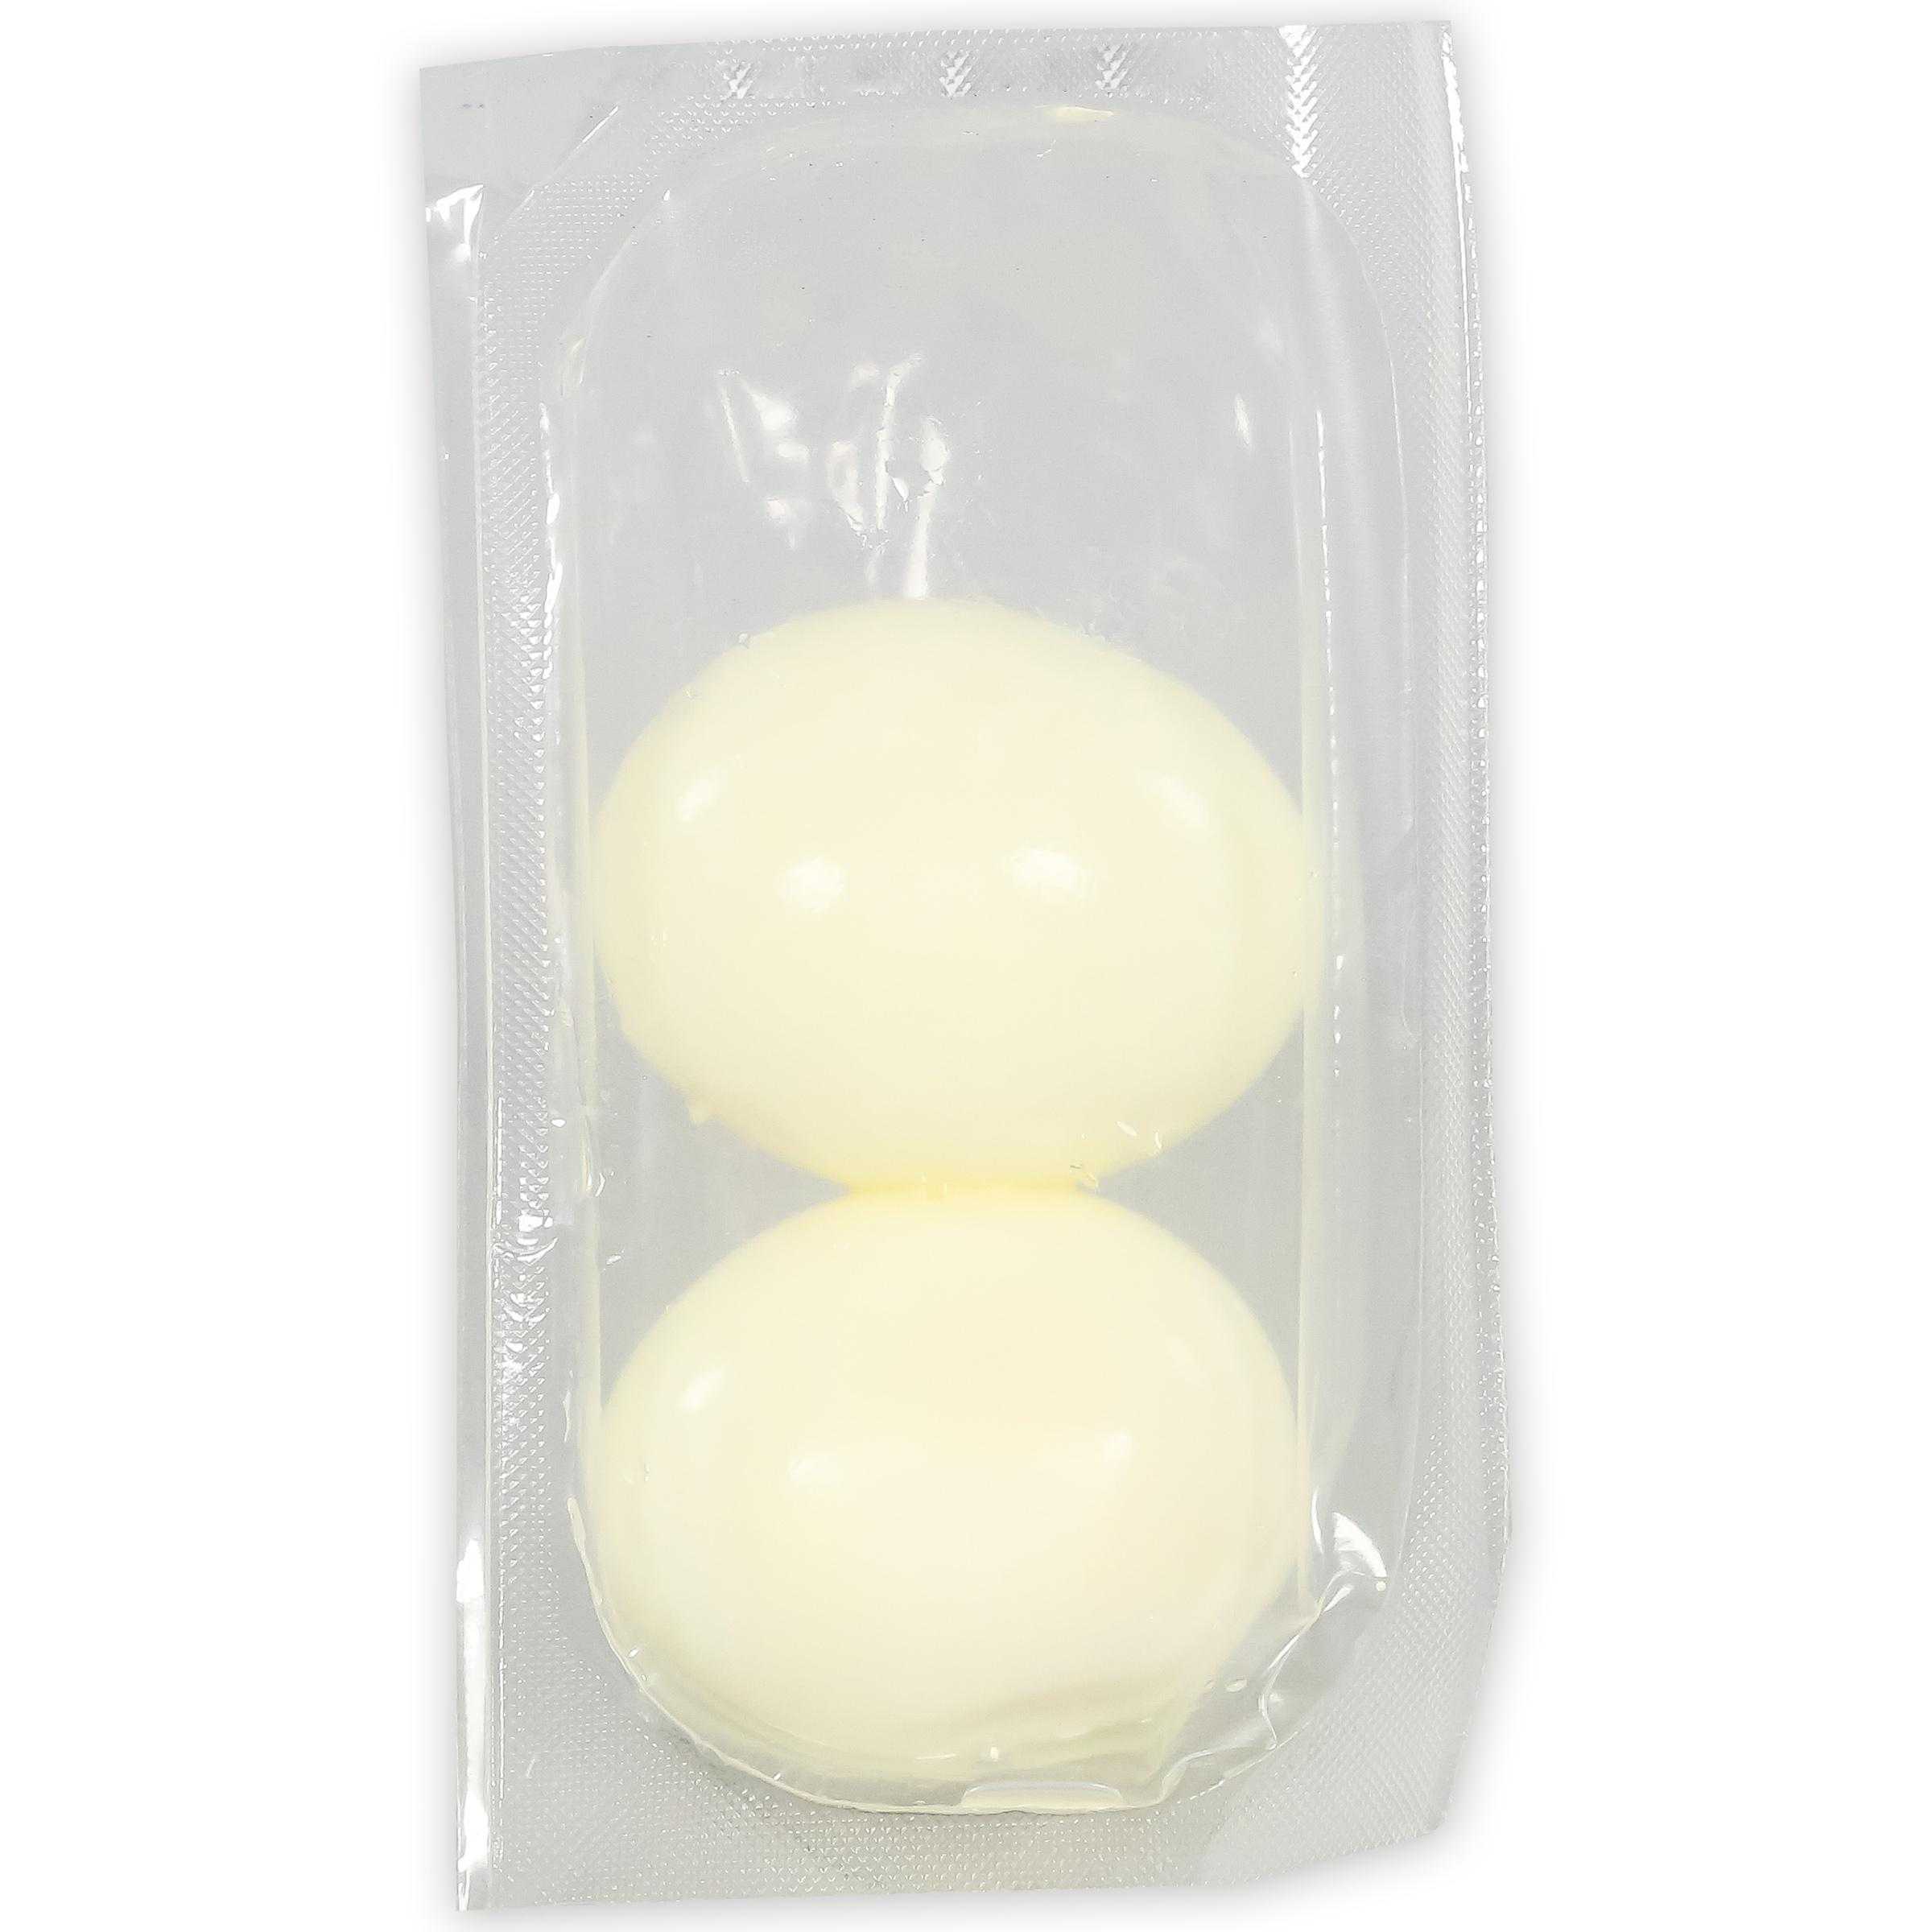 Abbotsford Farms® American Humane Certified Cage Free Peeled Hard Cooked Eggs, 48/2 Count Dry Pack